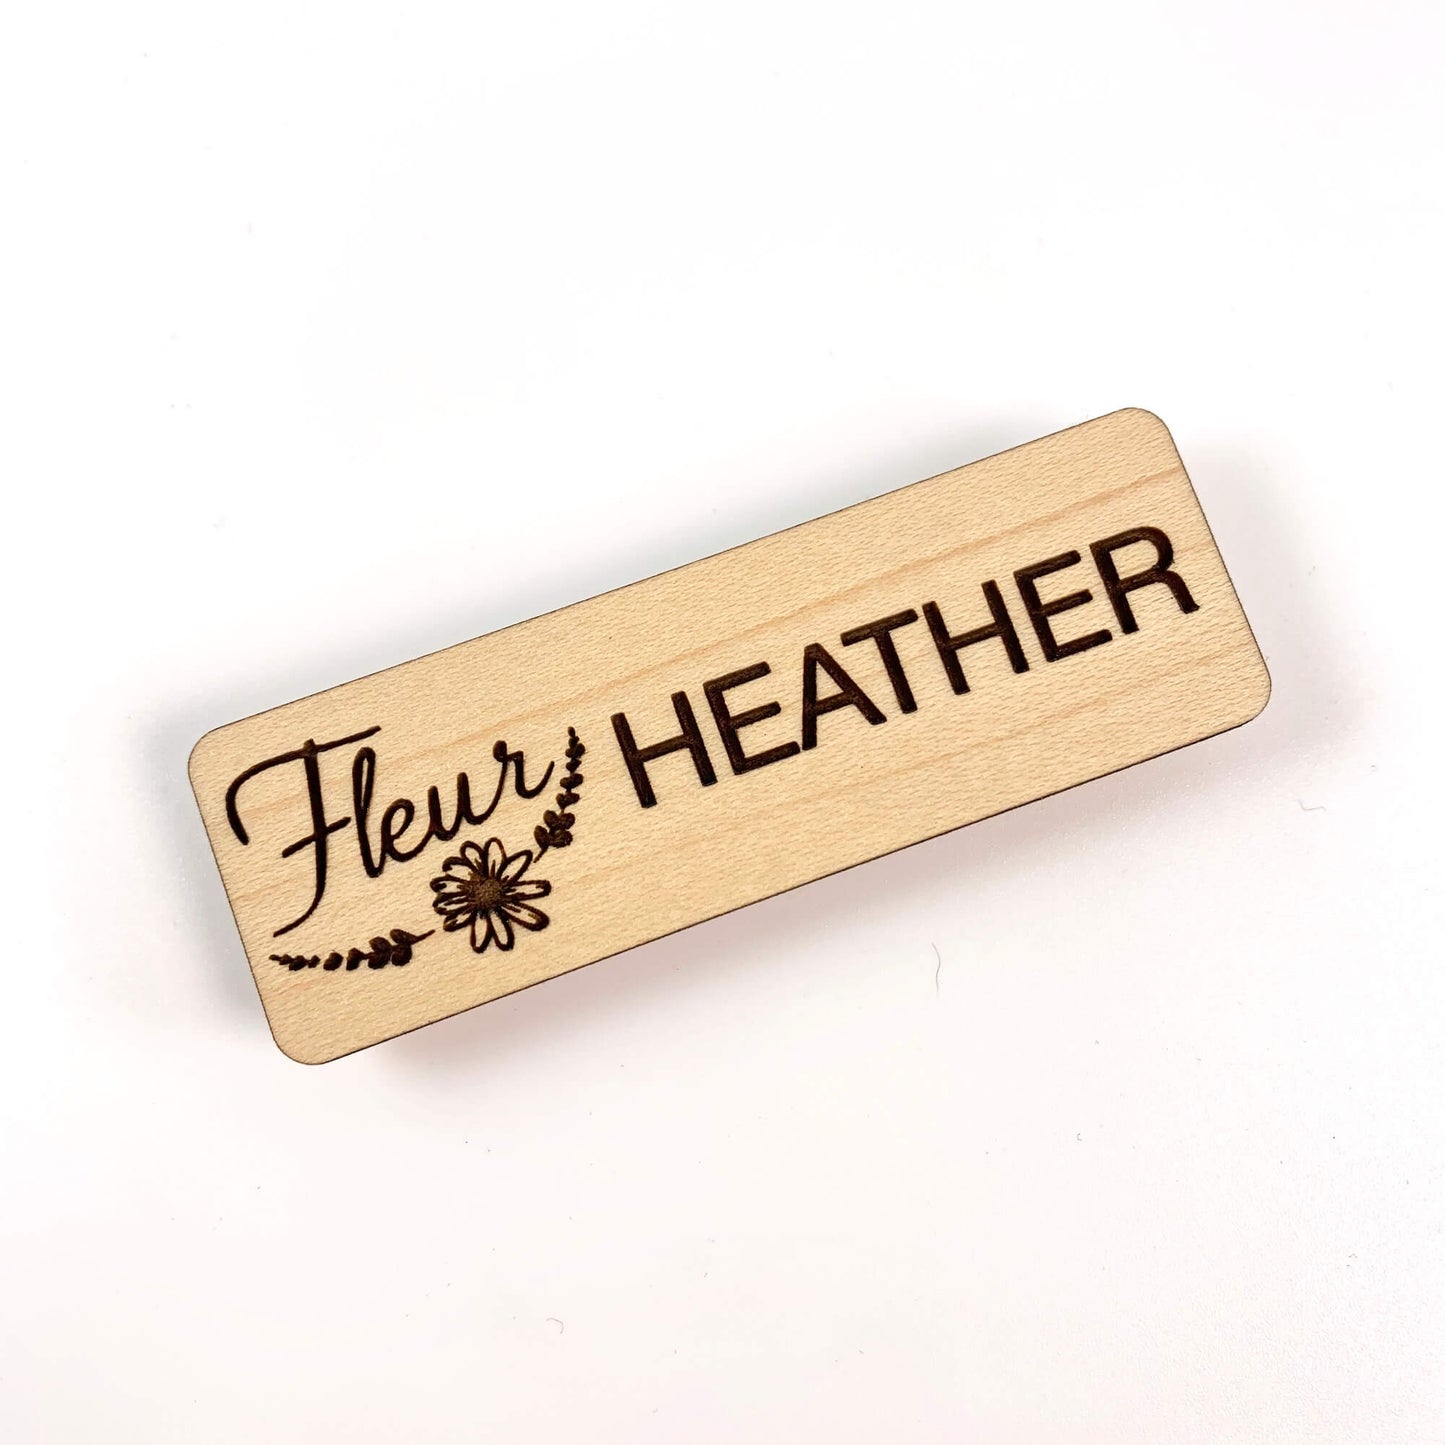 Custom Magnetic Name Tags - Laser cut and laser engraved maple wood by LeeMo Designs in Bend, Oregon